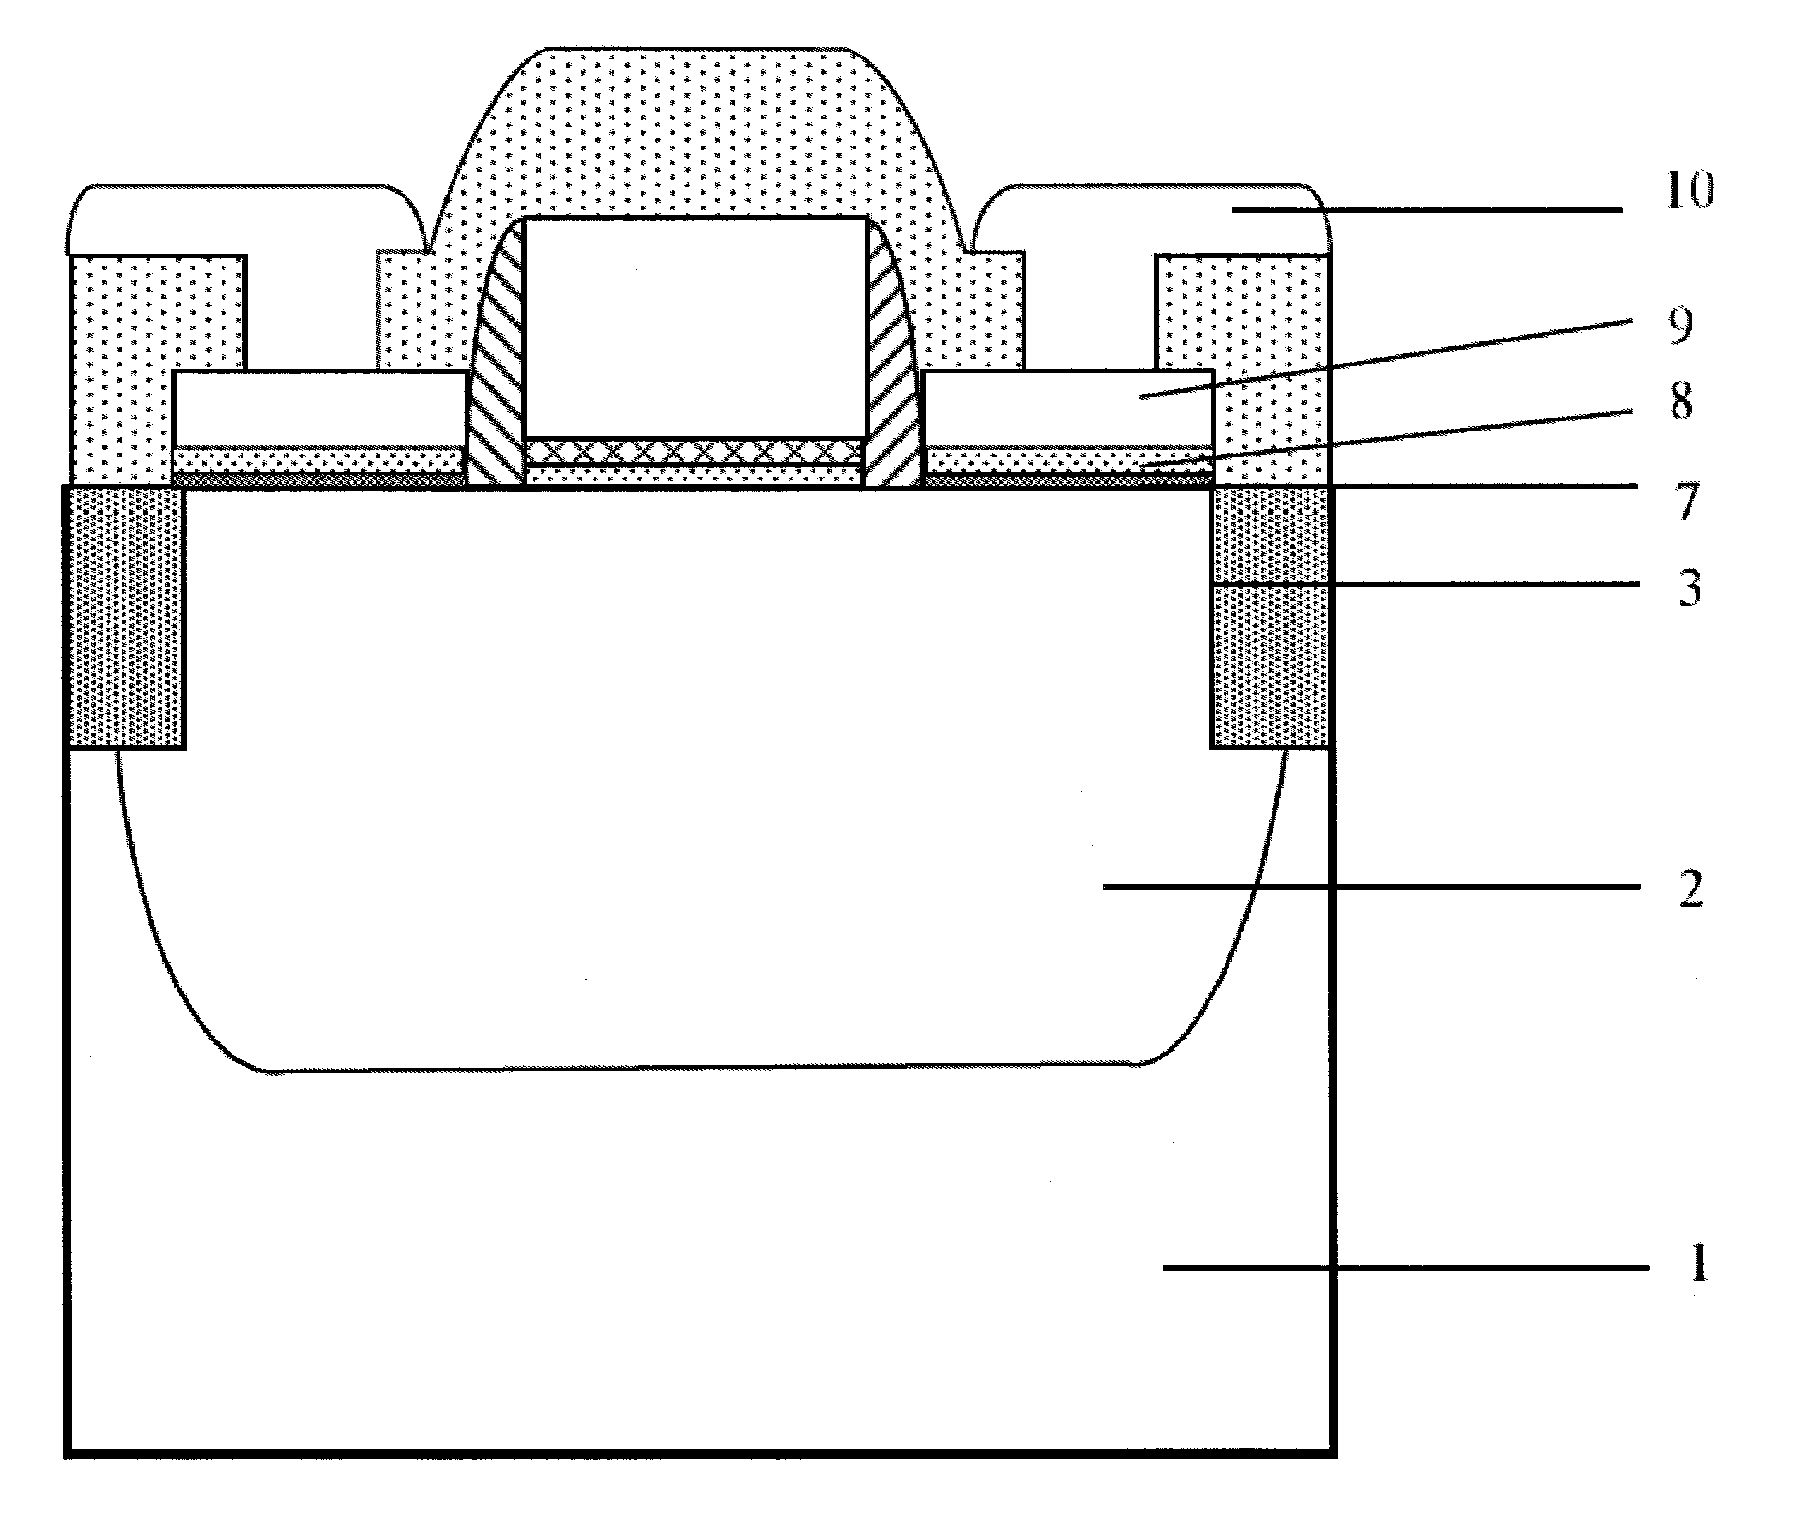 Ge-based nmos device and method for fabricating the same